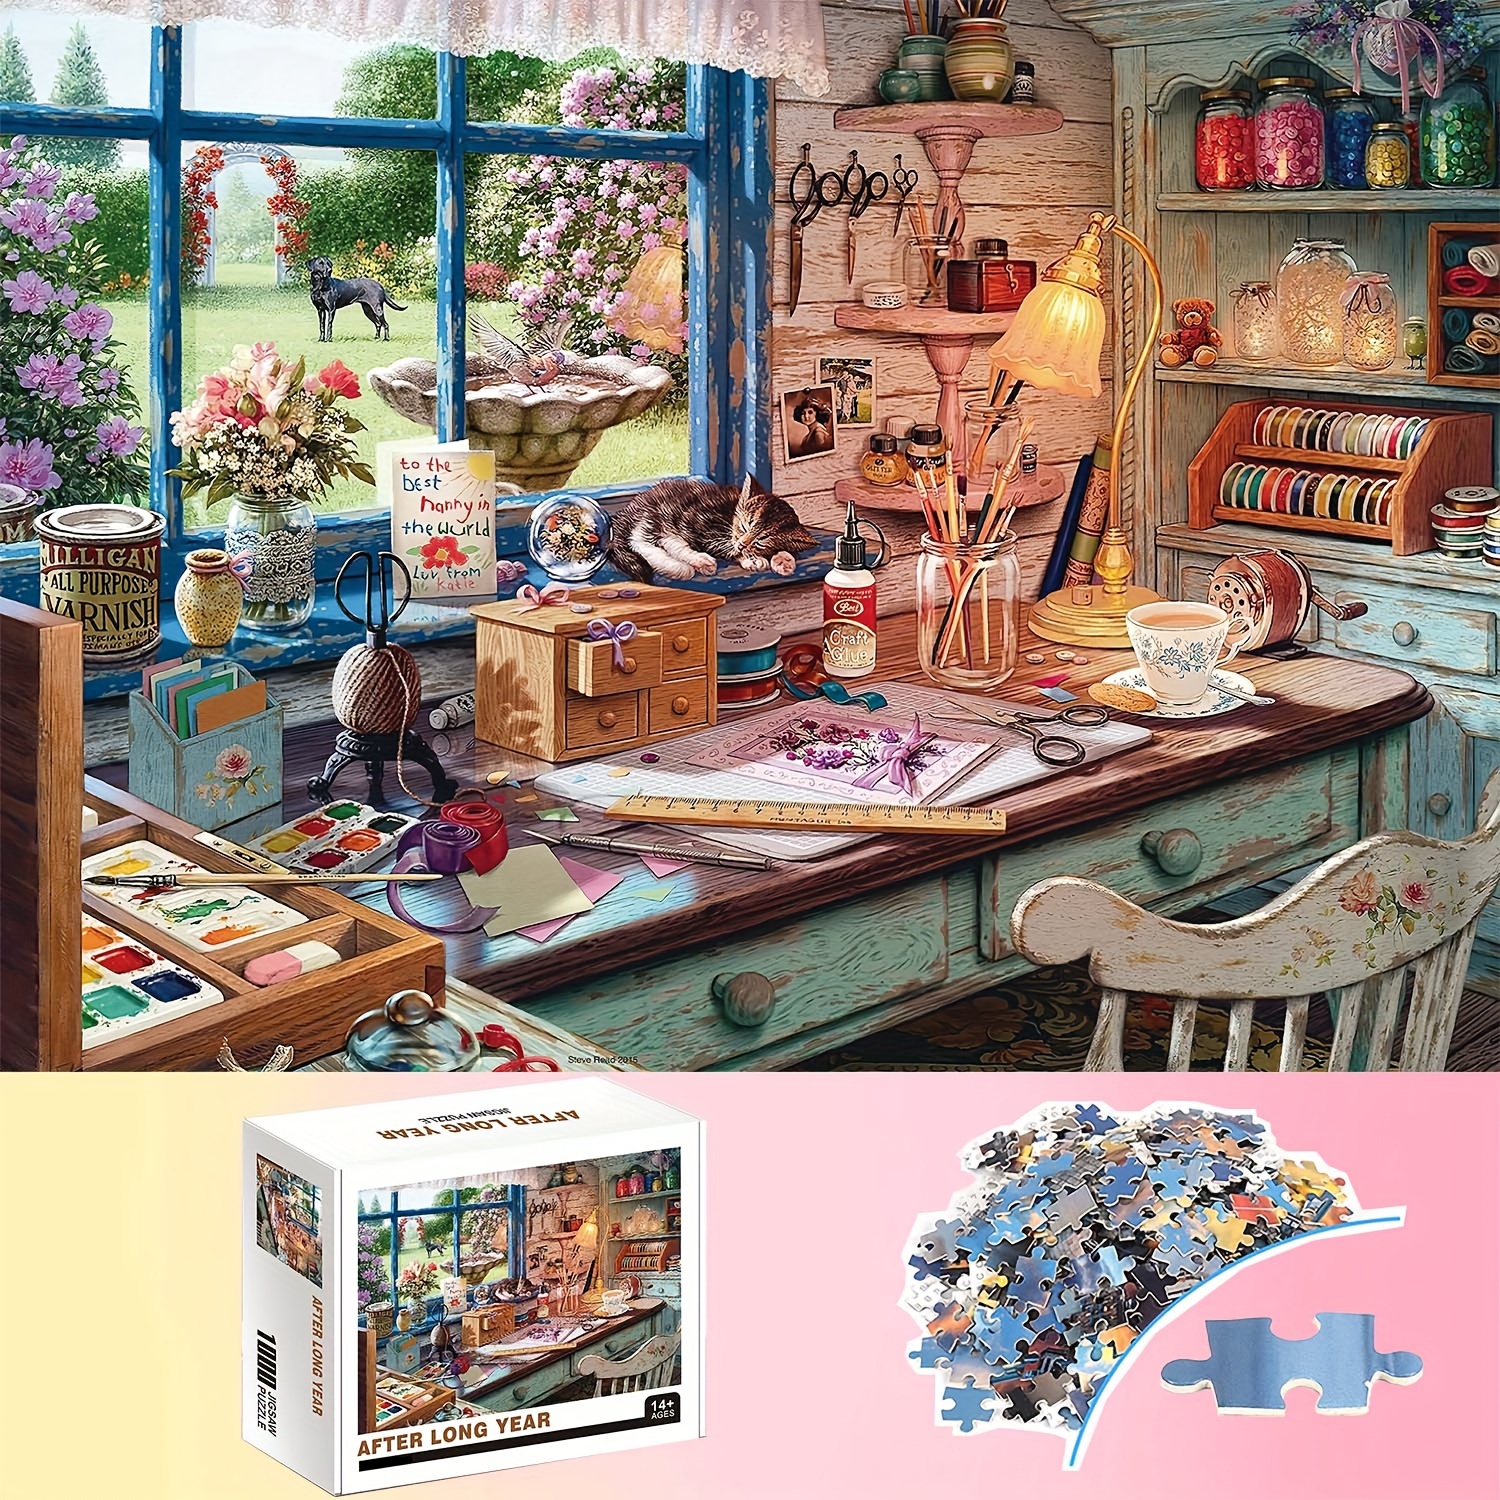 

1000pcs After Long Year Puzzles, Thick And Durable Seamless Jigsaw Puzzles For Adults Premium Quality Fun Family Challenging Puzzles For Birthday, Christmas, Halloween, Thanksgiving, Easter